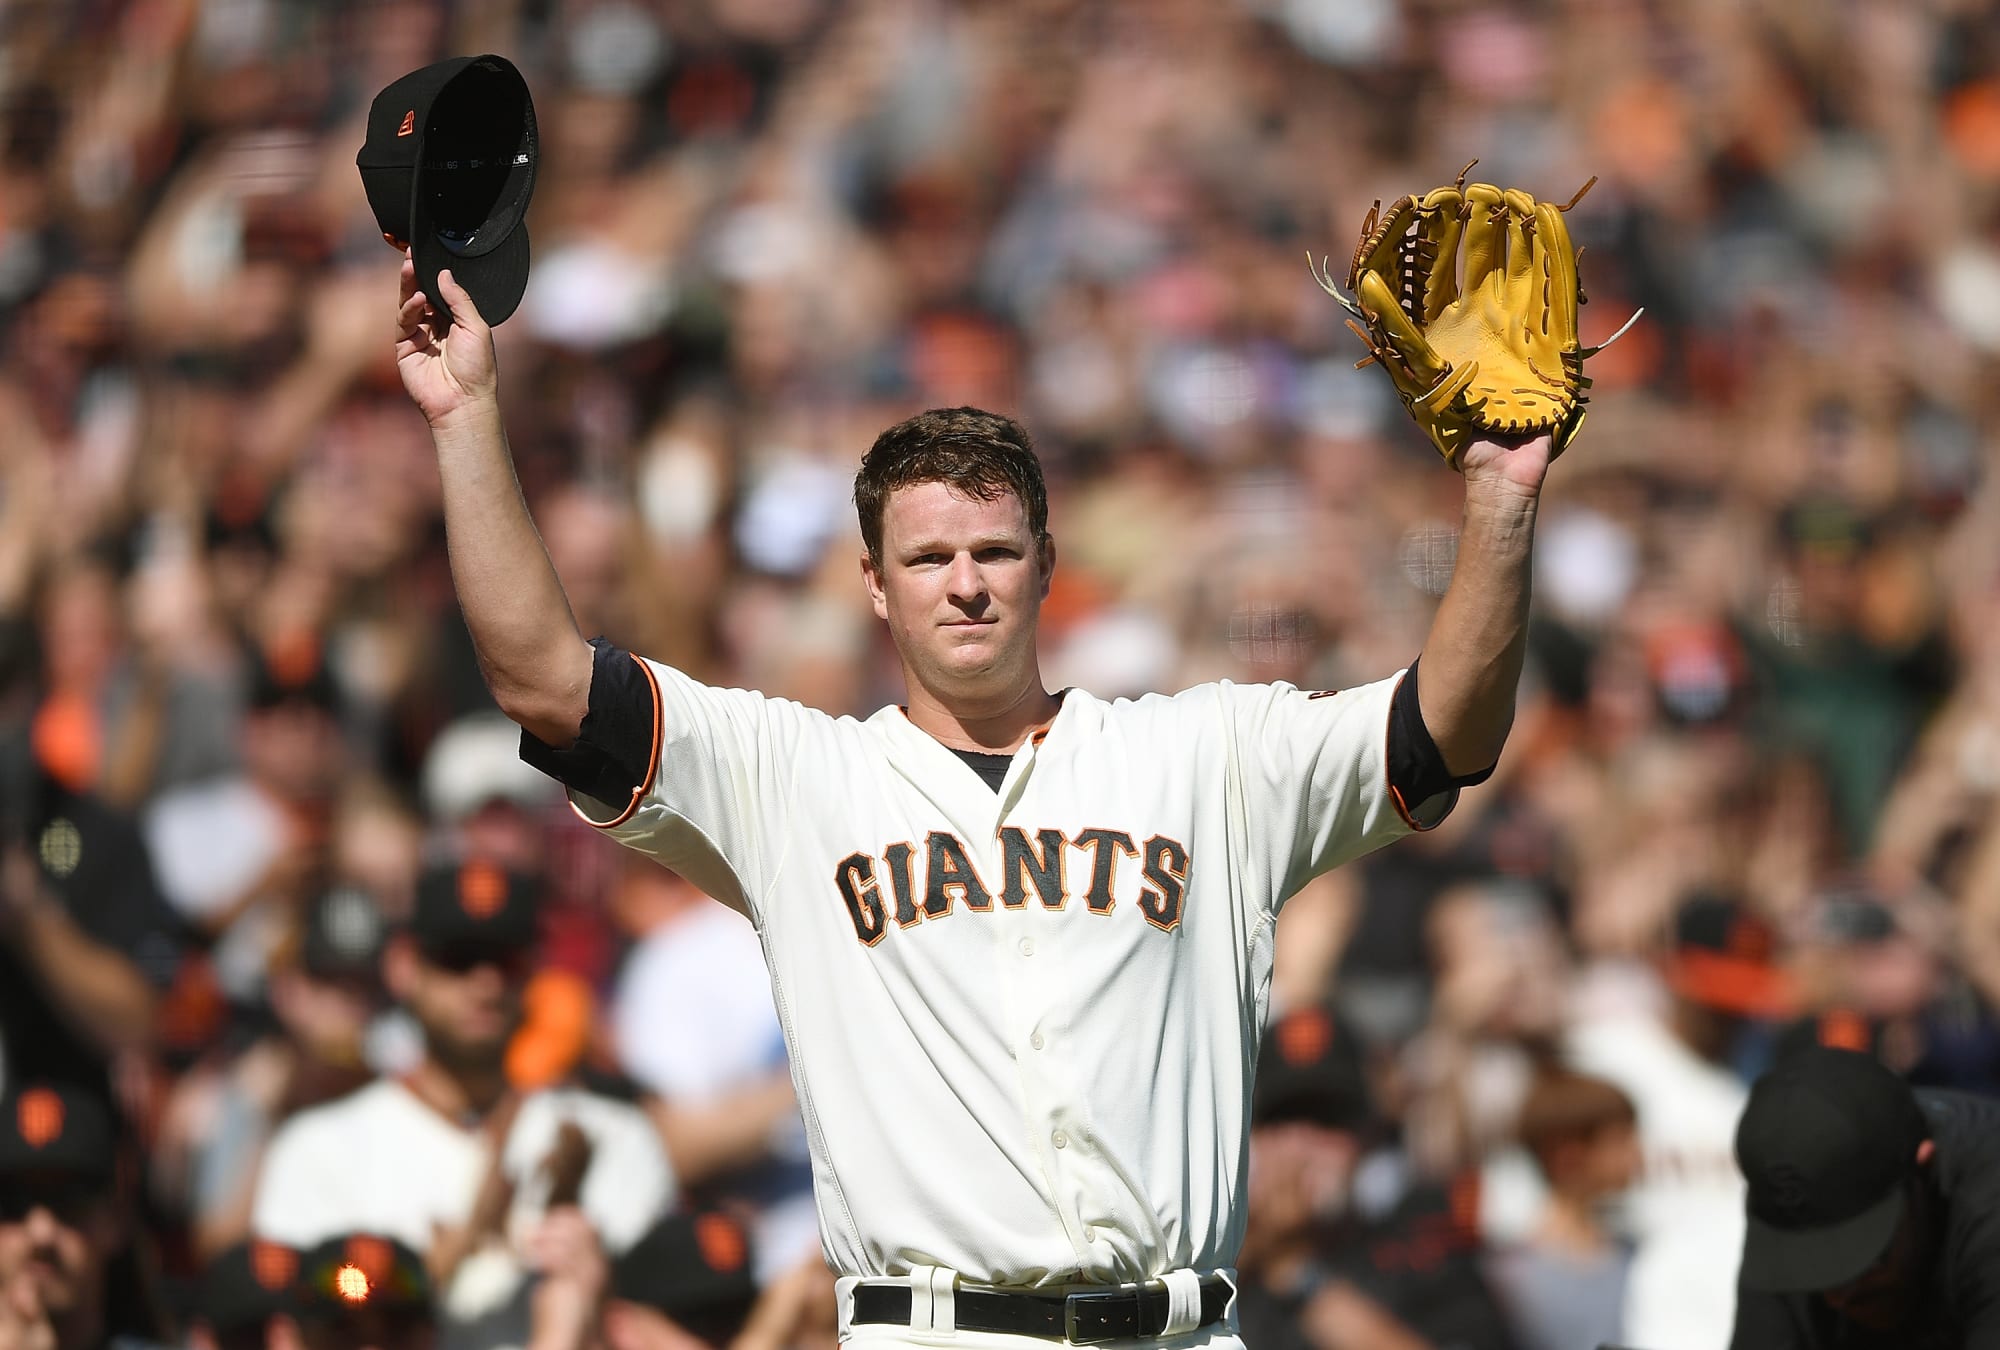 Cain's gem gives Giants a perfect game at last